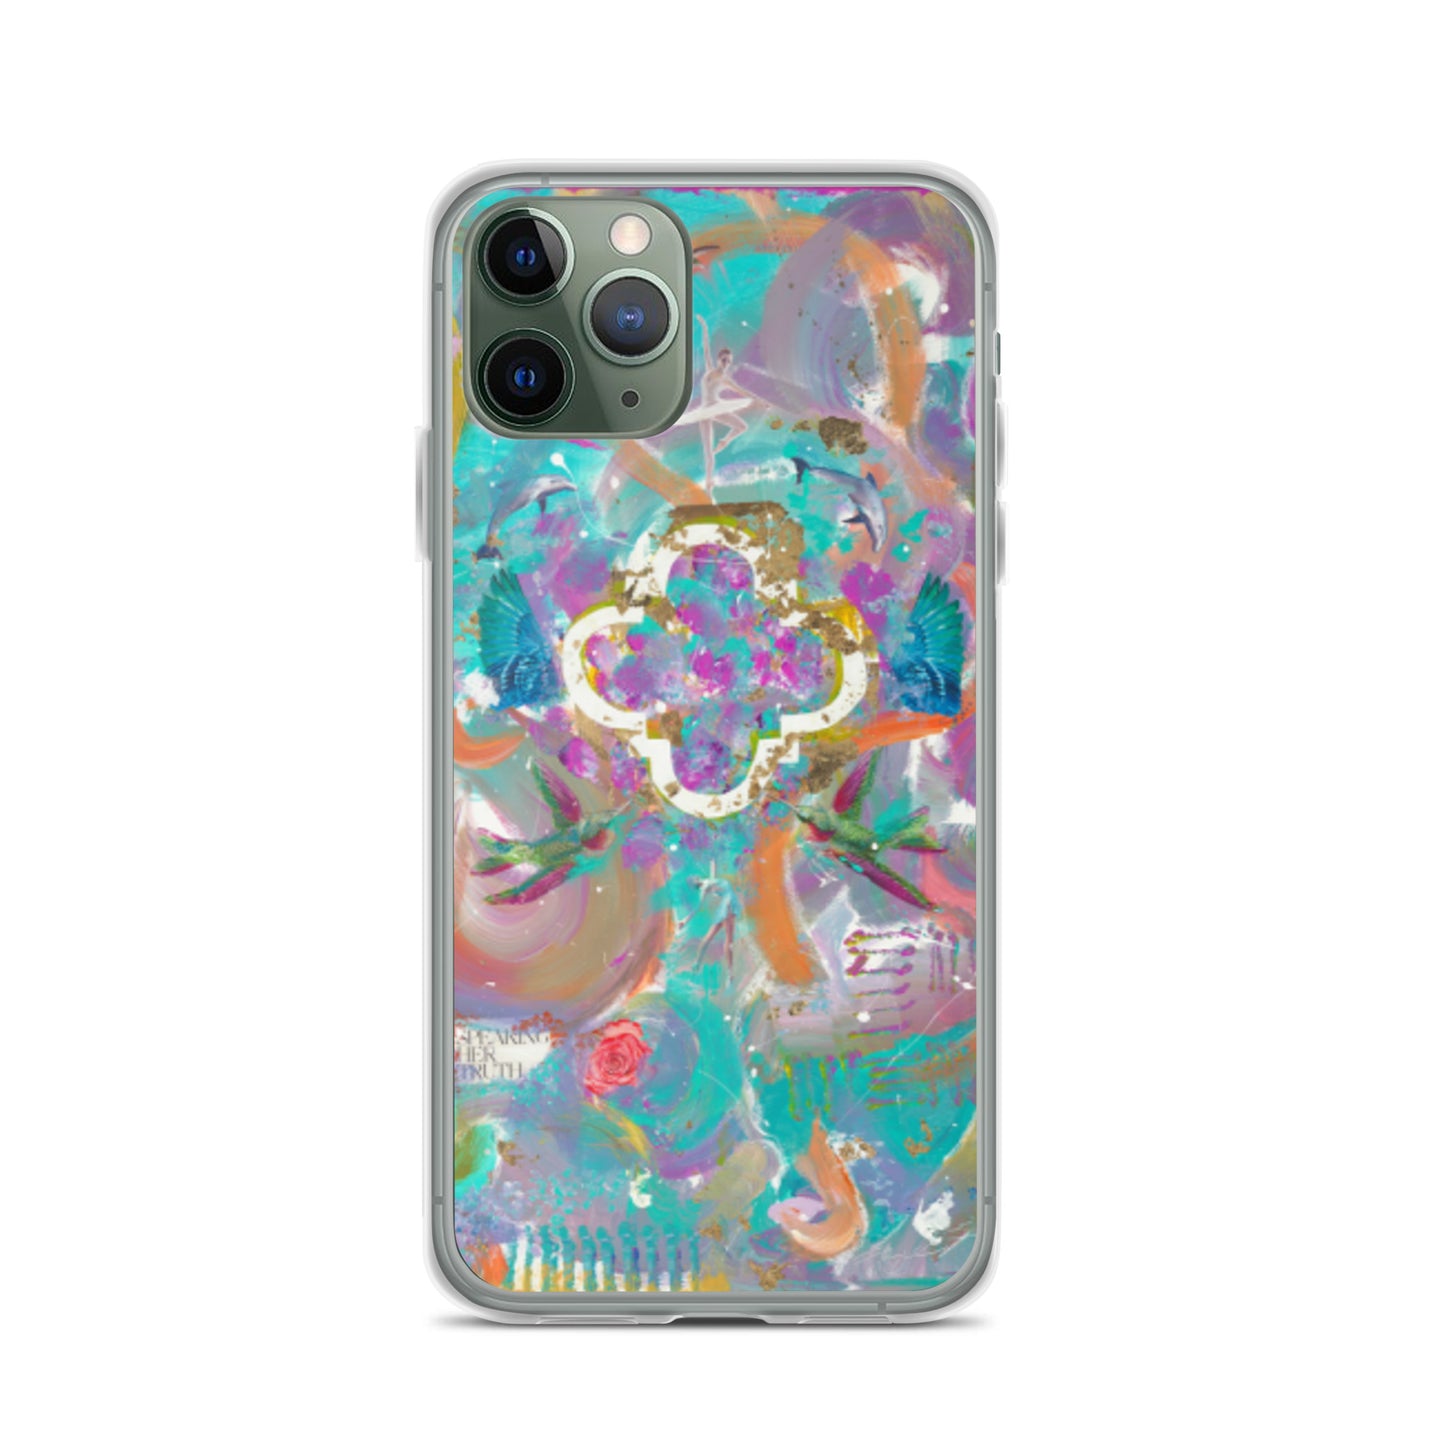 "TRULY FREE" Print (Abstract Painting made by Chianne) IPHONE CASE